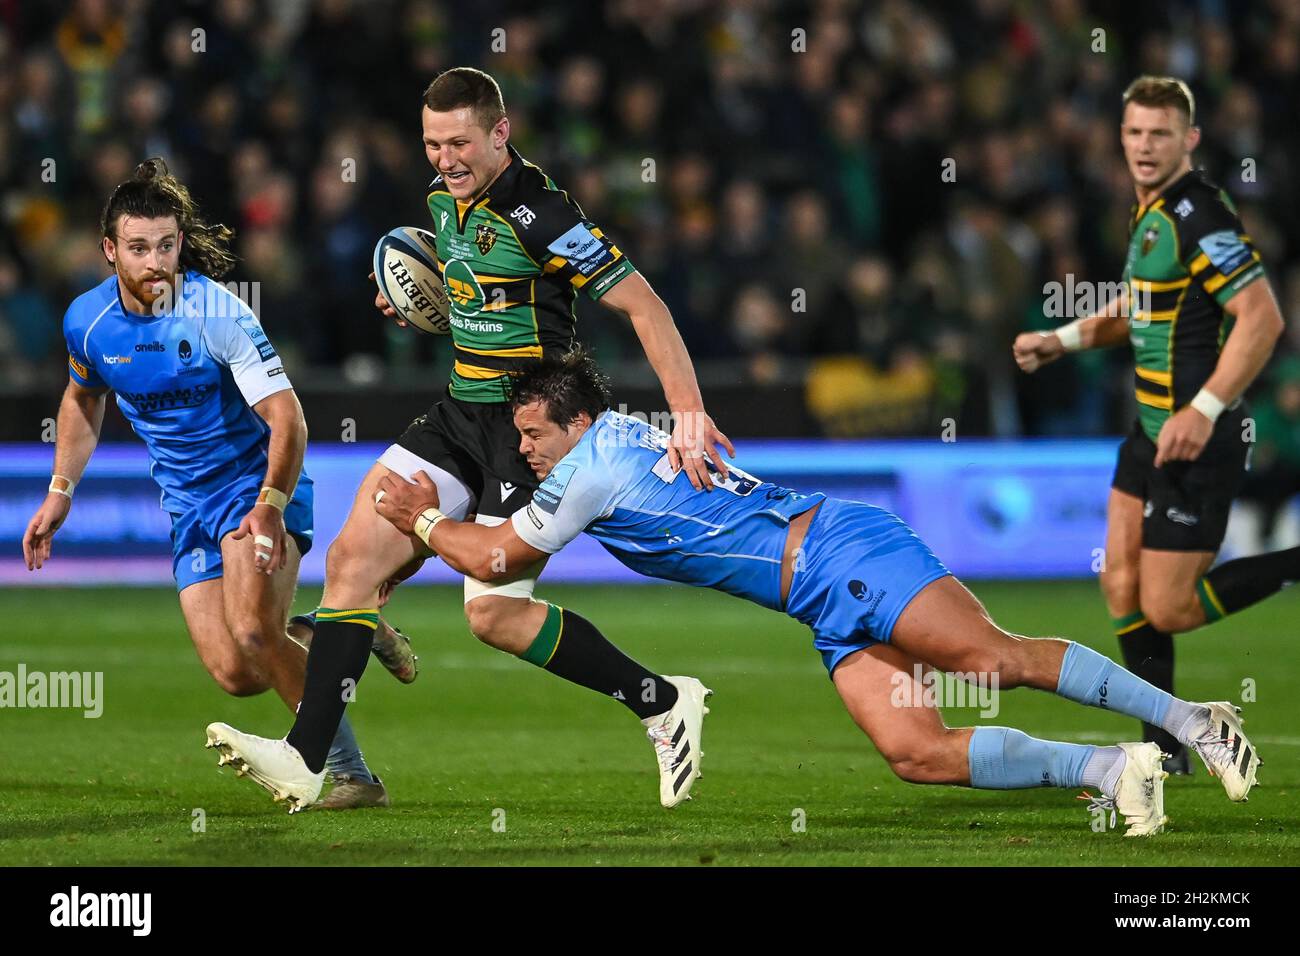 Northampton, UK. 22nd Oct, 2021. Fraser Dingwall of Northampton Saints is tackled by Francois Venter of Worcester Warriors in, on 10/22/2021. (Photo by Craig Thomas/News Images/Sipa USA) Credit: Sipa USA/Alamy Live News Credit: Sipa USA/Alamy Live News Stock Photo